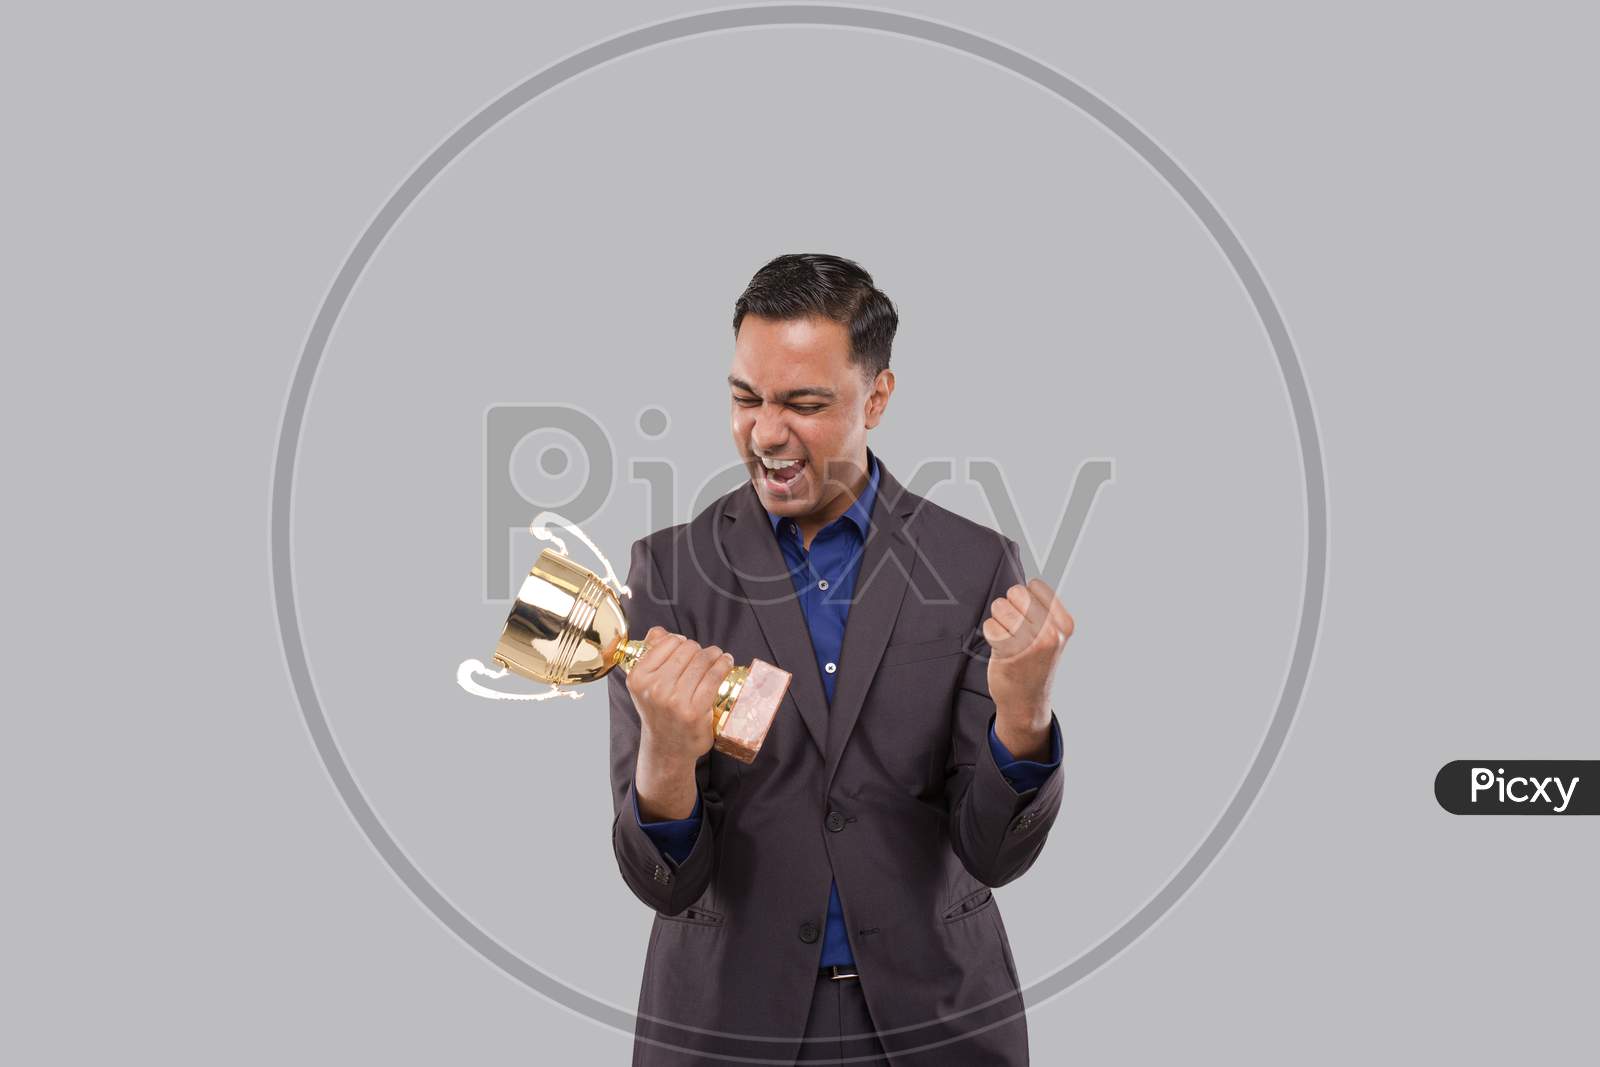 Businessman Very Happy And Excited, Raising Arms, Celebrating A Victory Or Success Holding Trophy. Winner Sign. Indian Business Man Isolated With Trophy In Hands